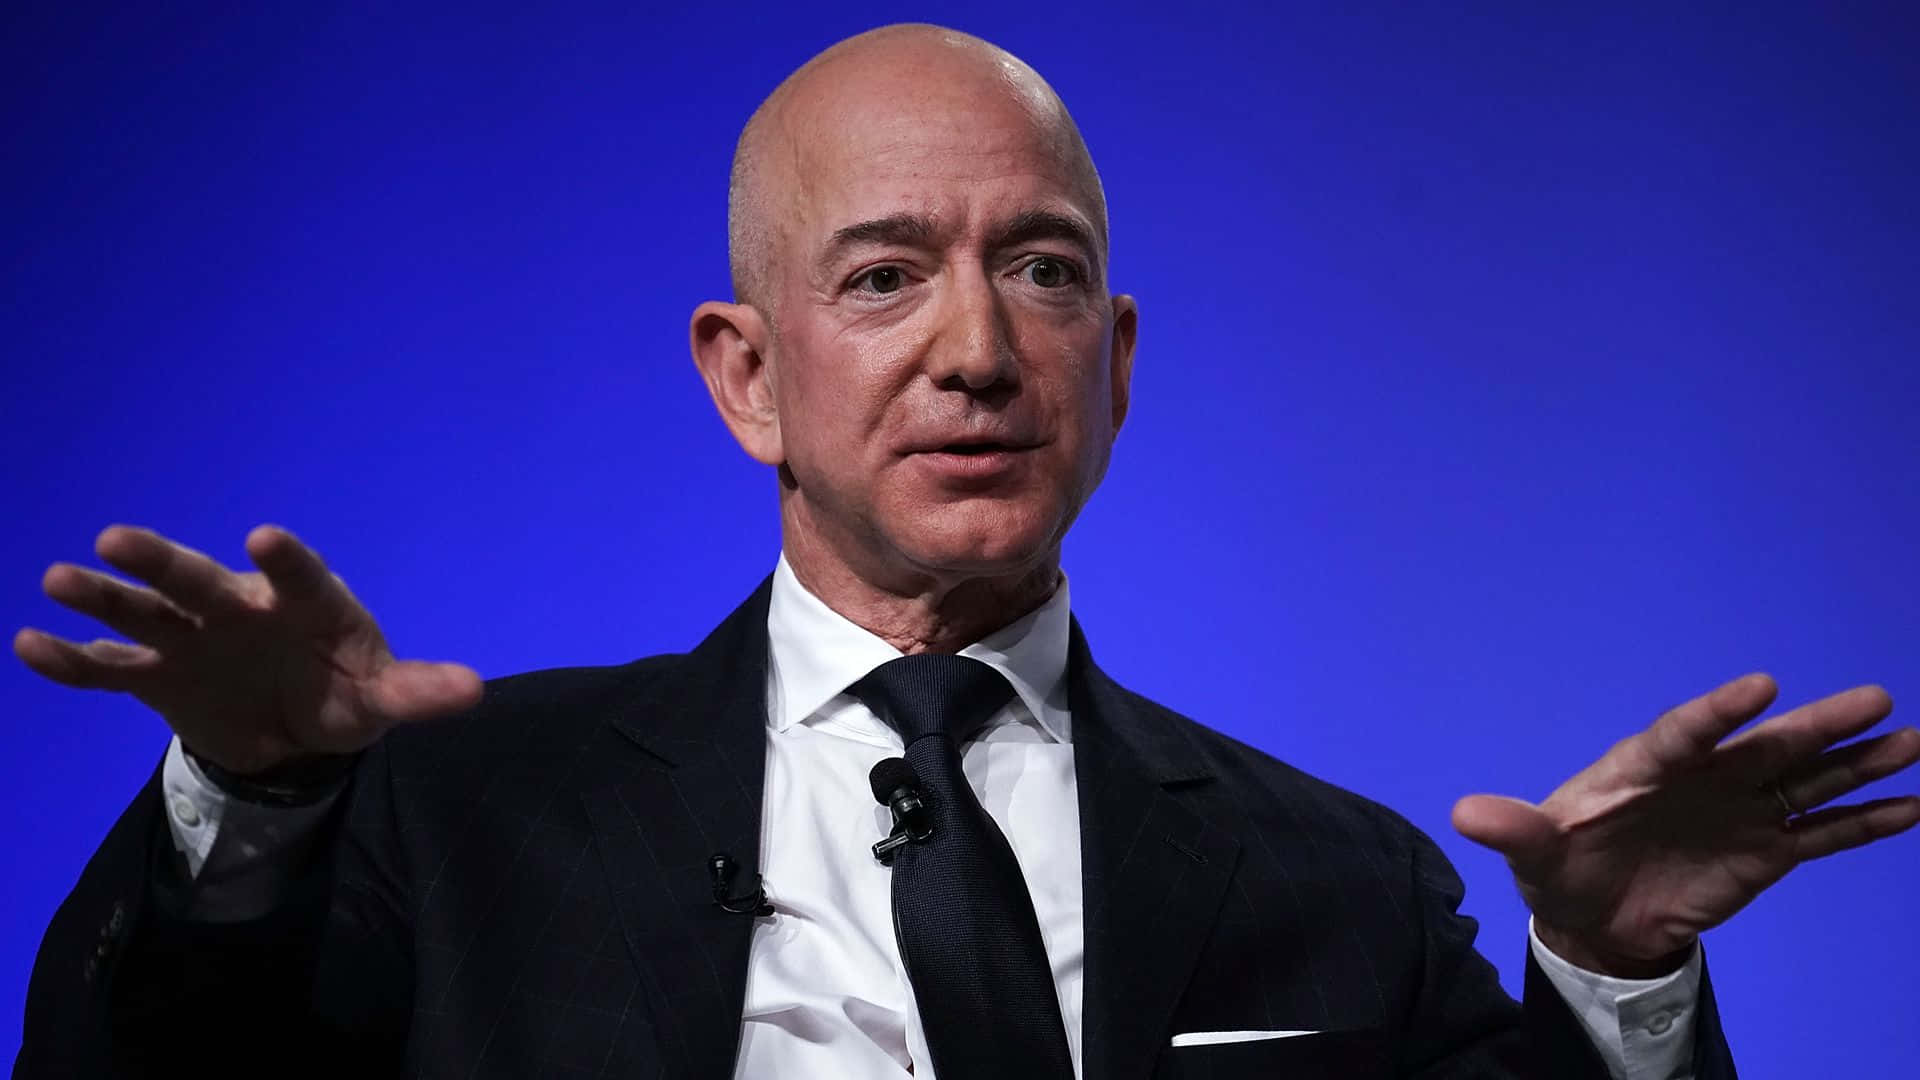 Jeff Bezos Smiling on a Neutral Background